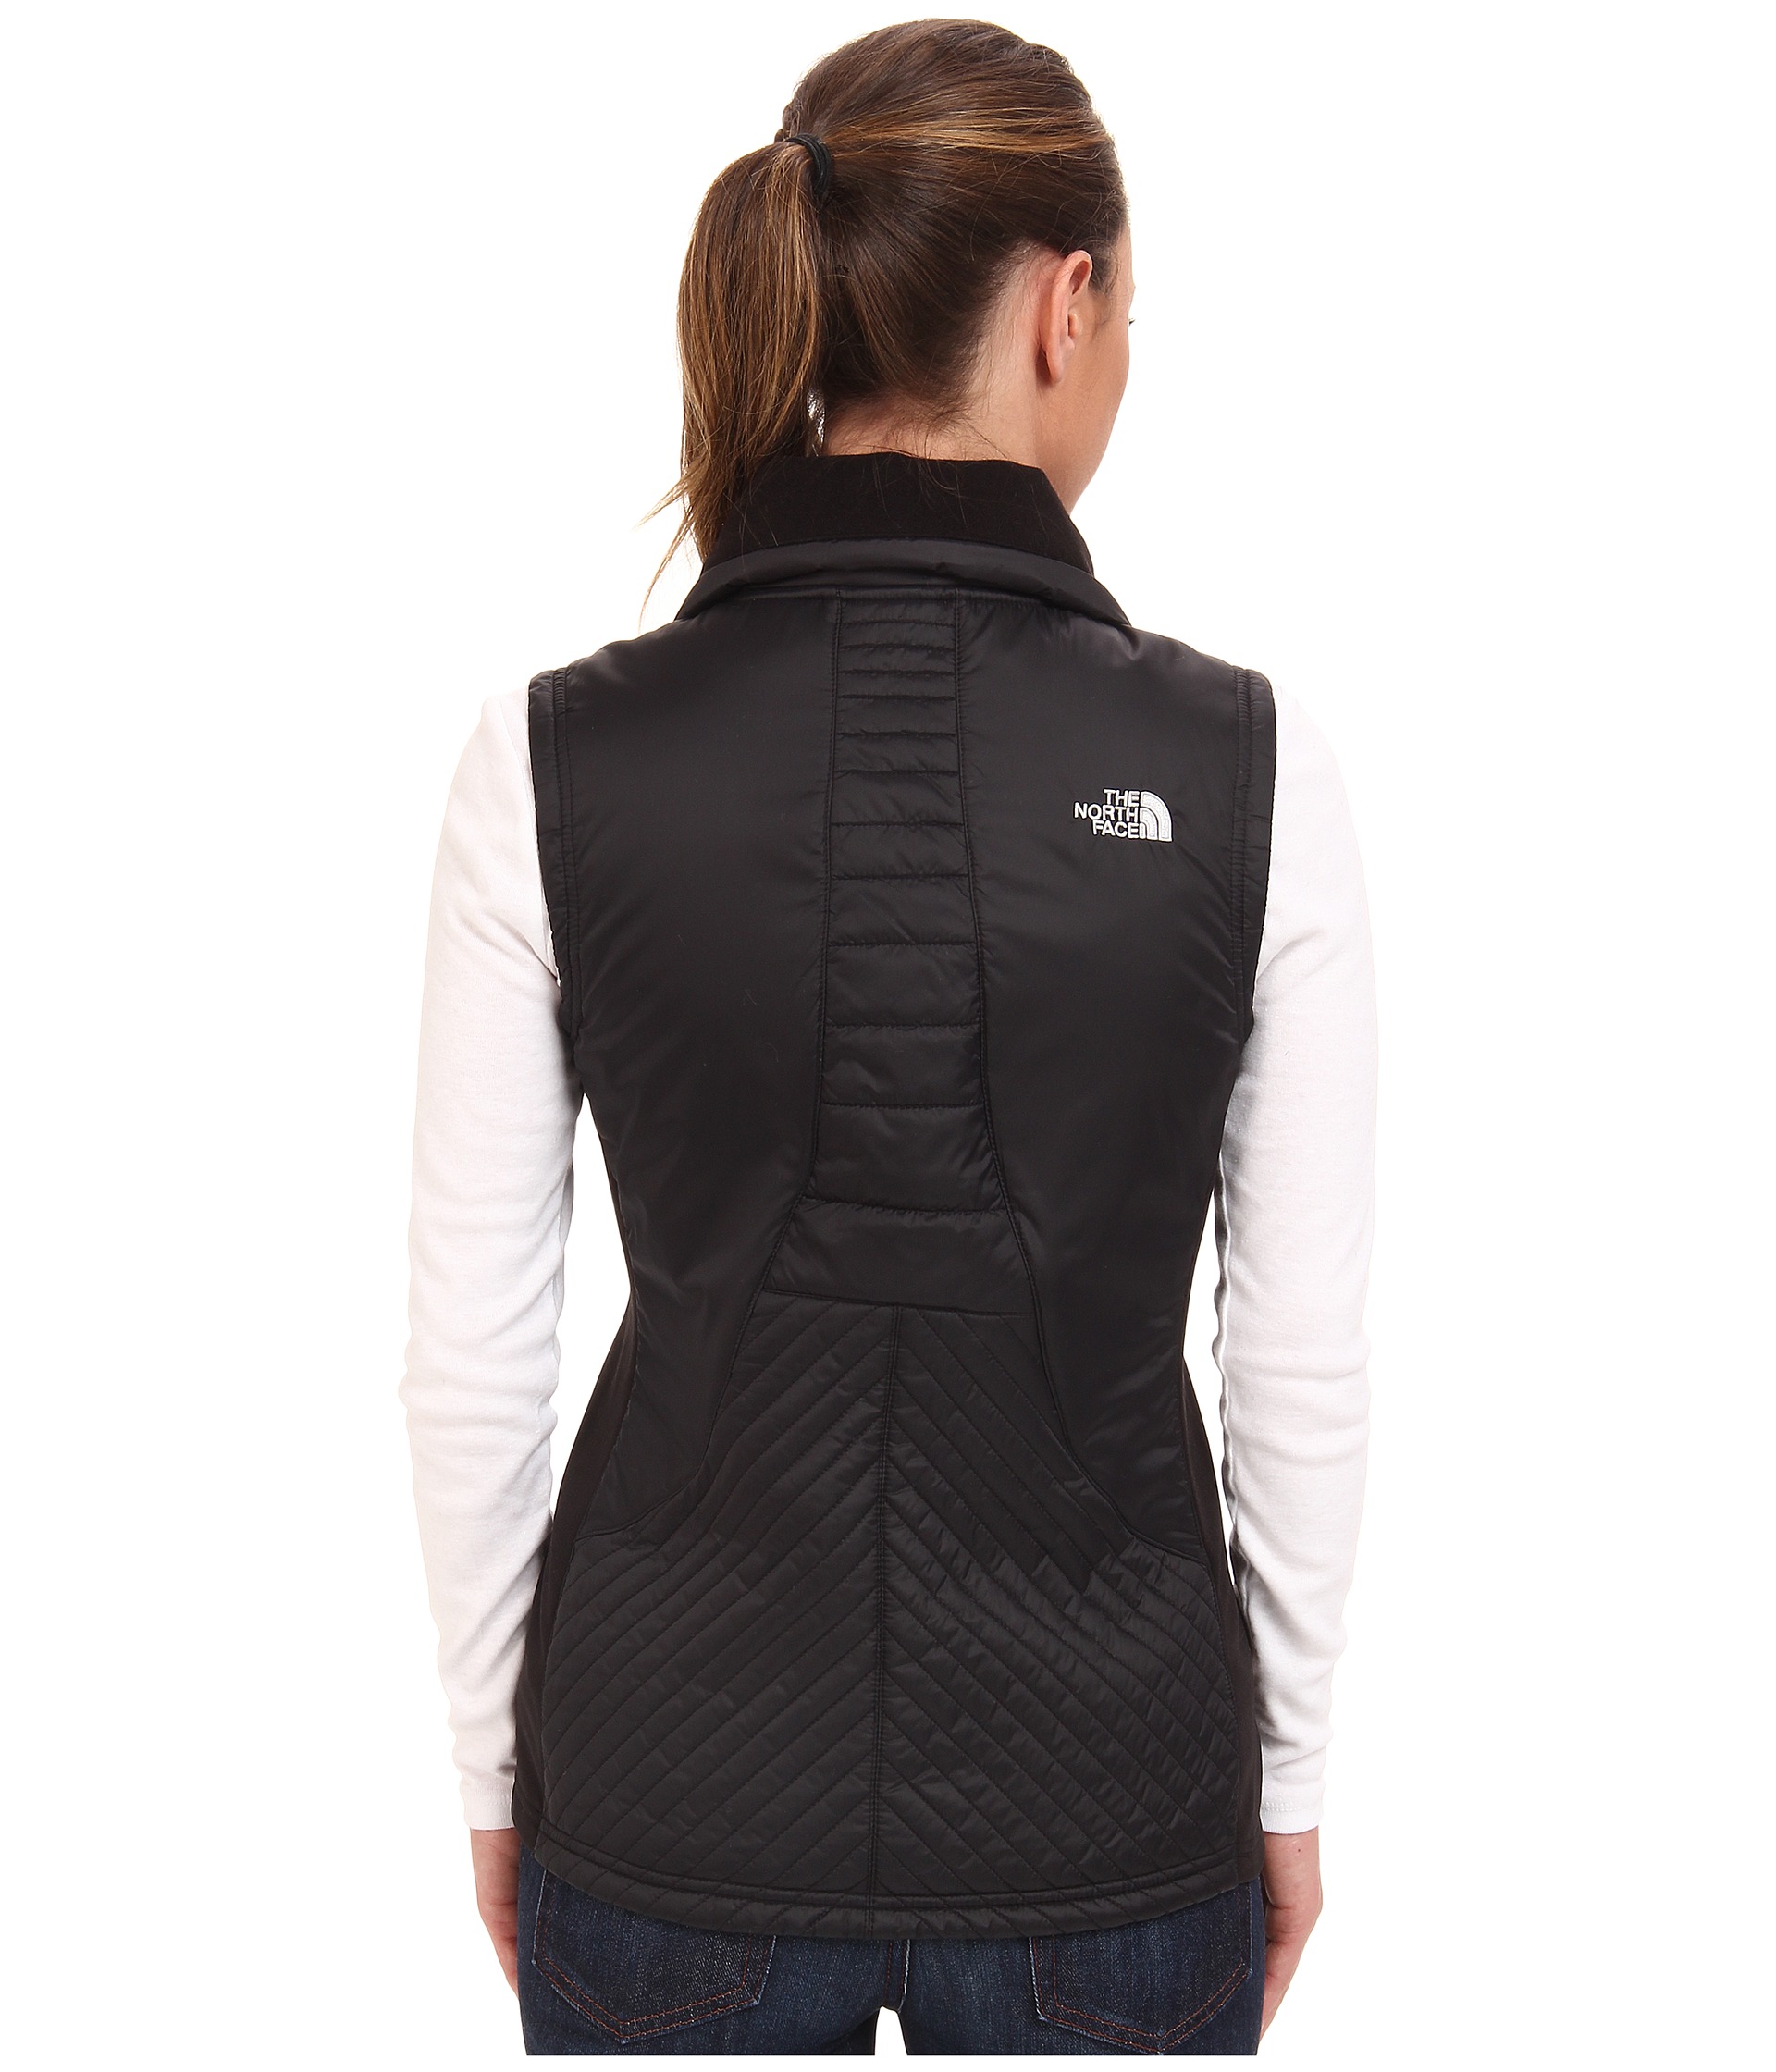 The North Face Sambe Vest | Shipped Free at Zappos